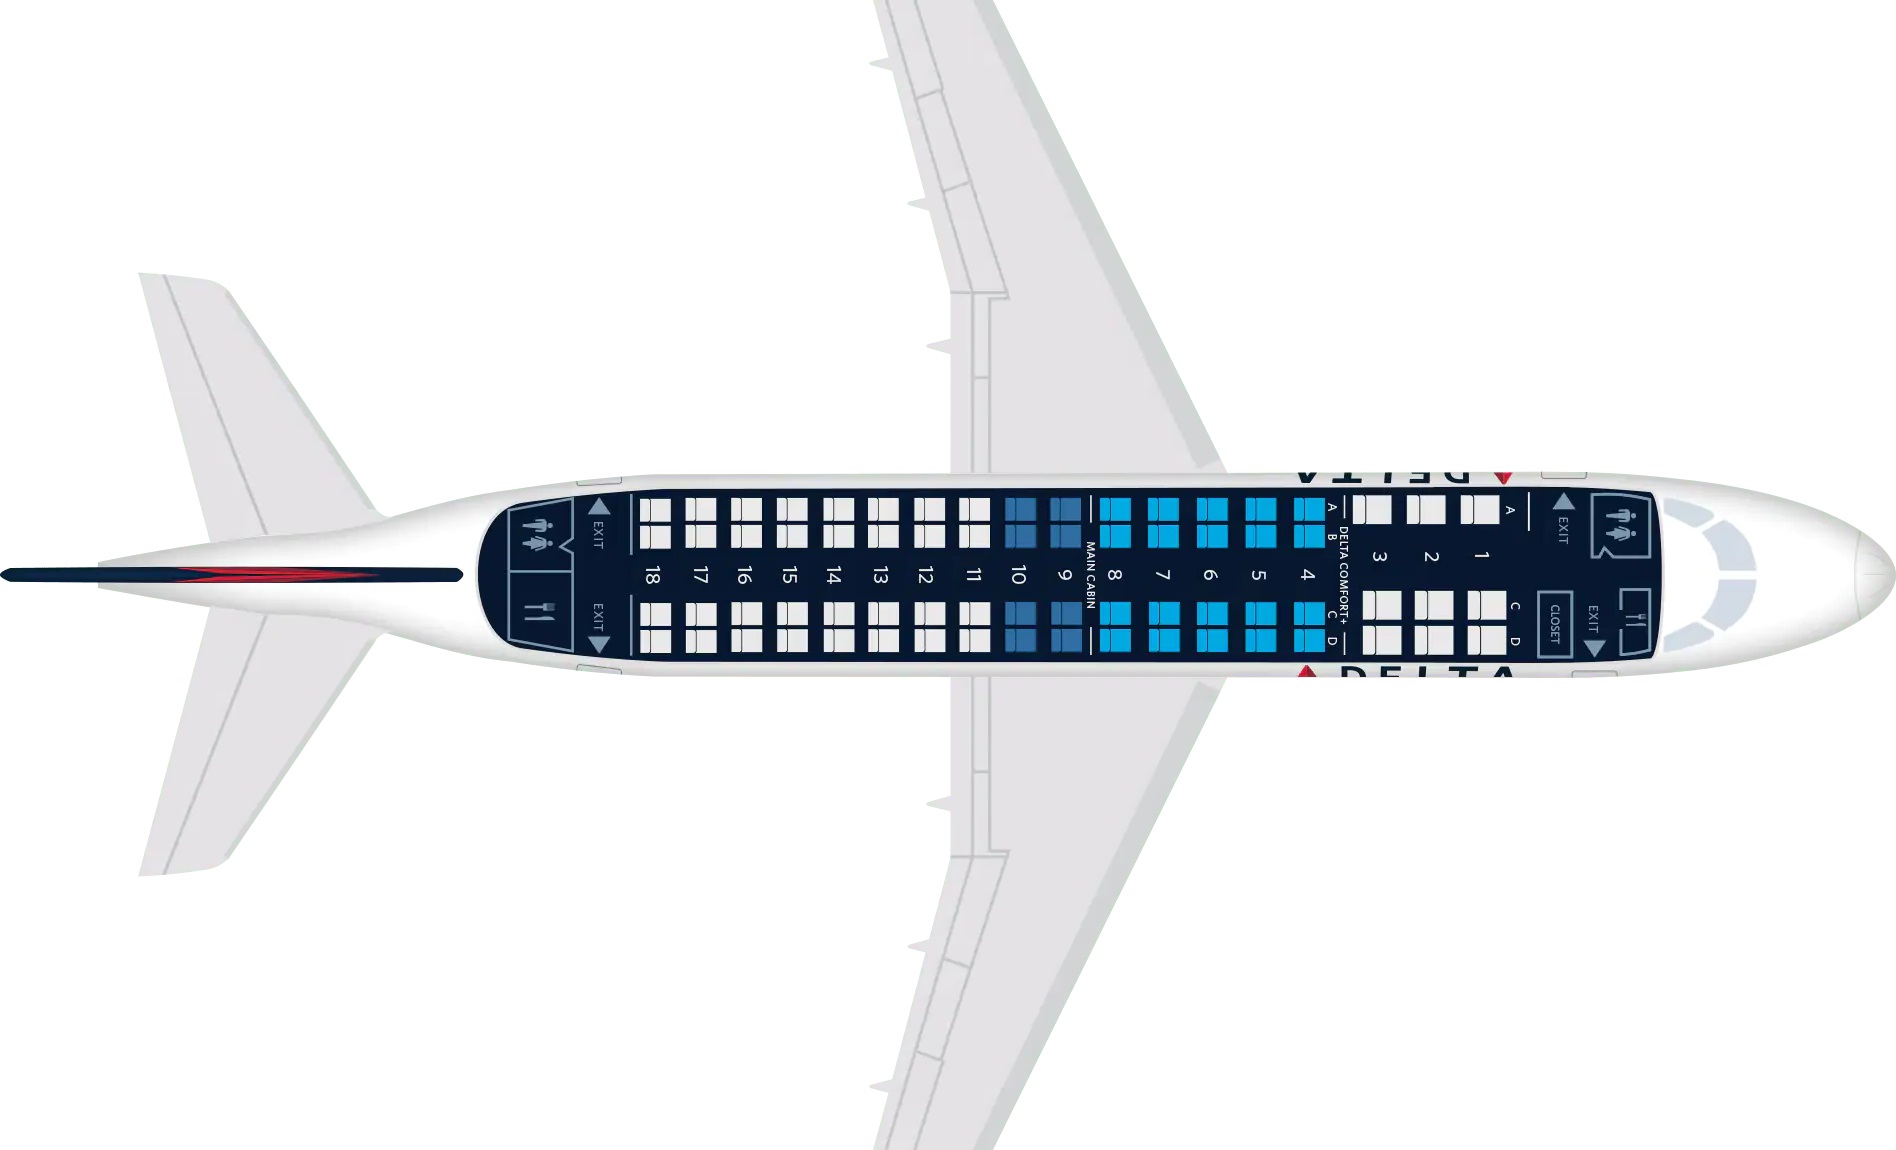 Delta Embraer Emb Jet Seating Chart Two Birds Home